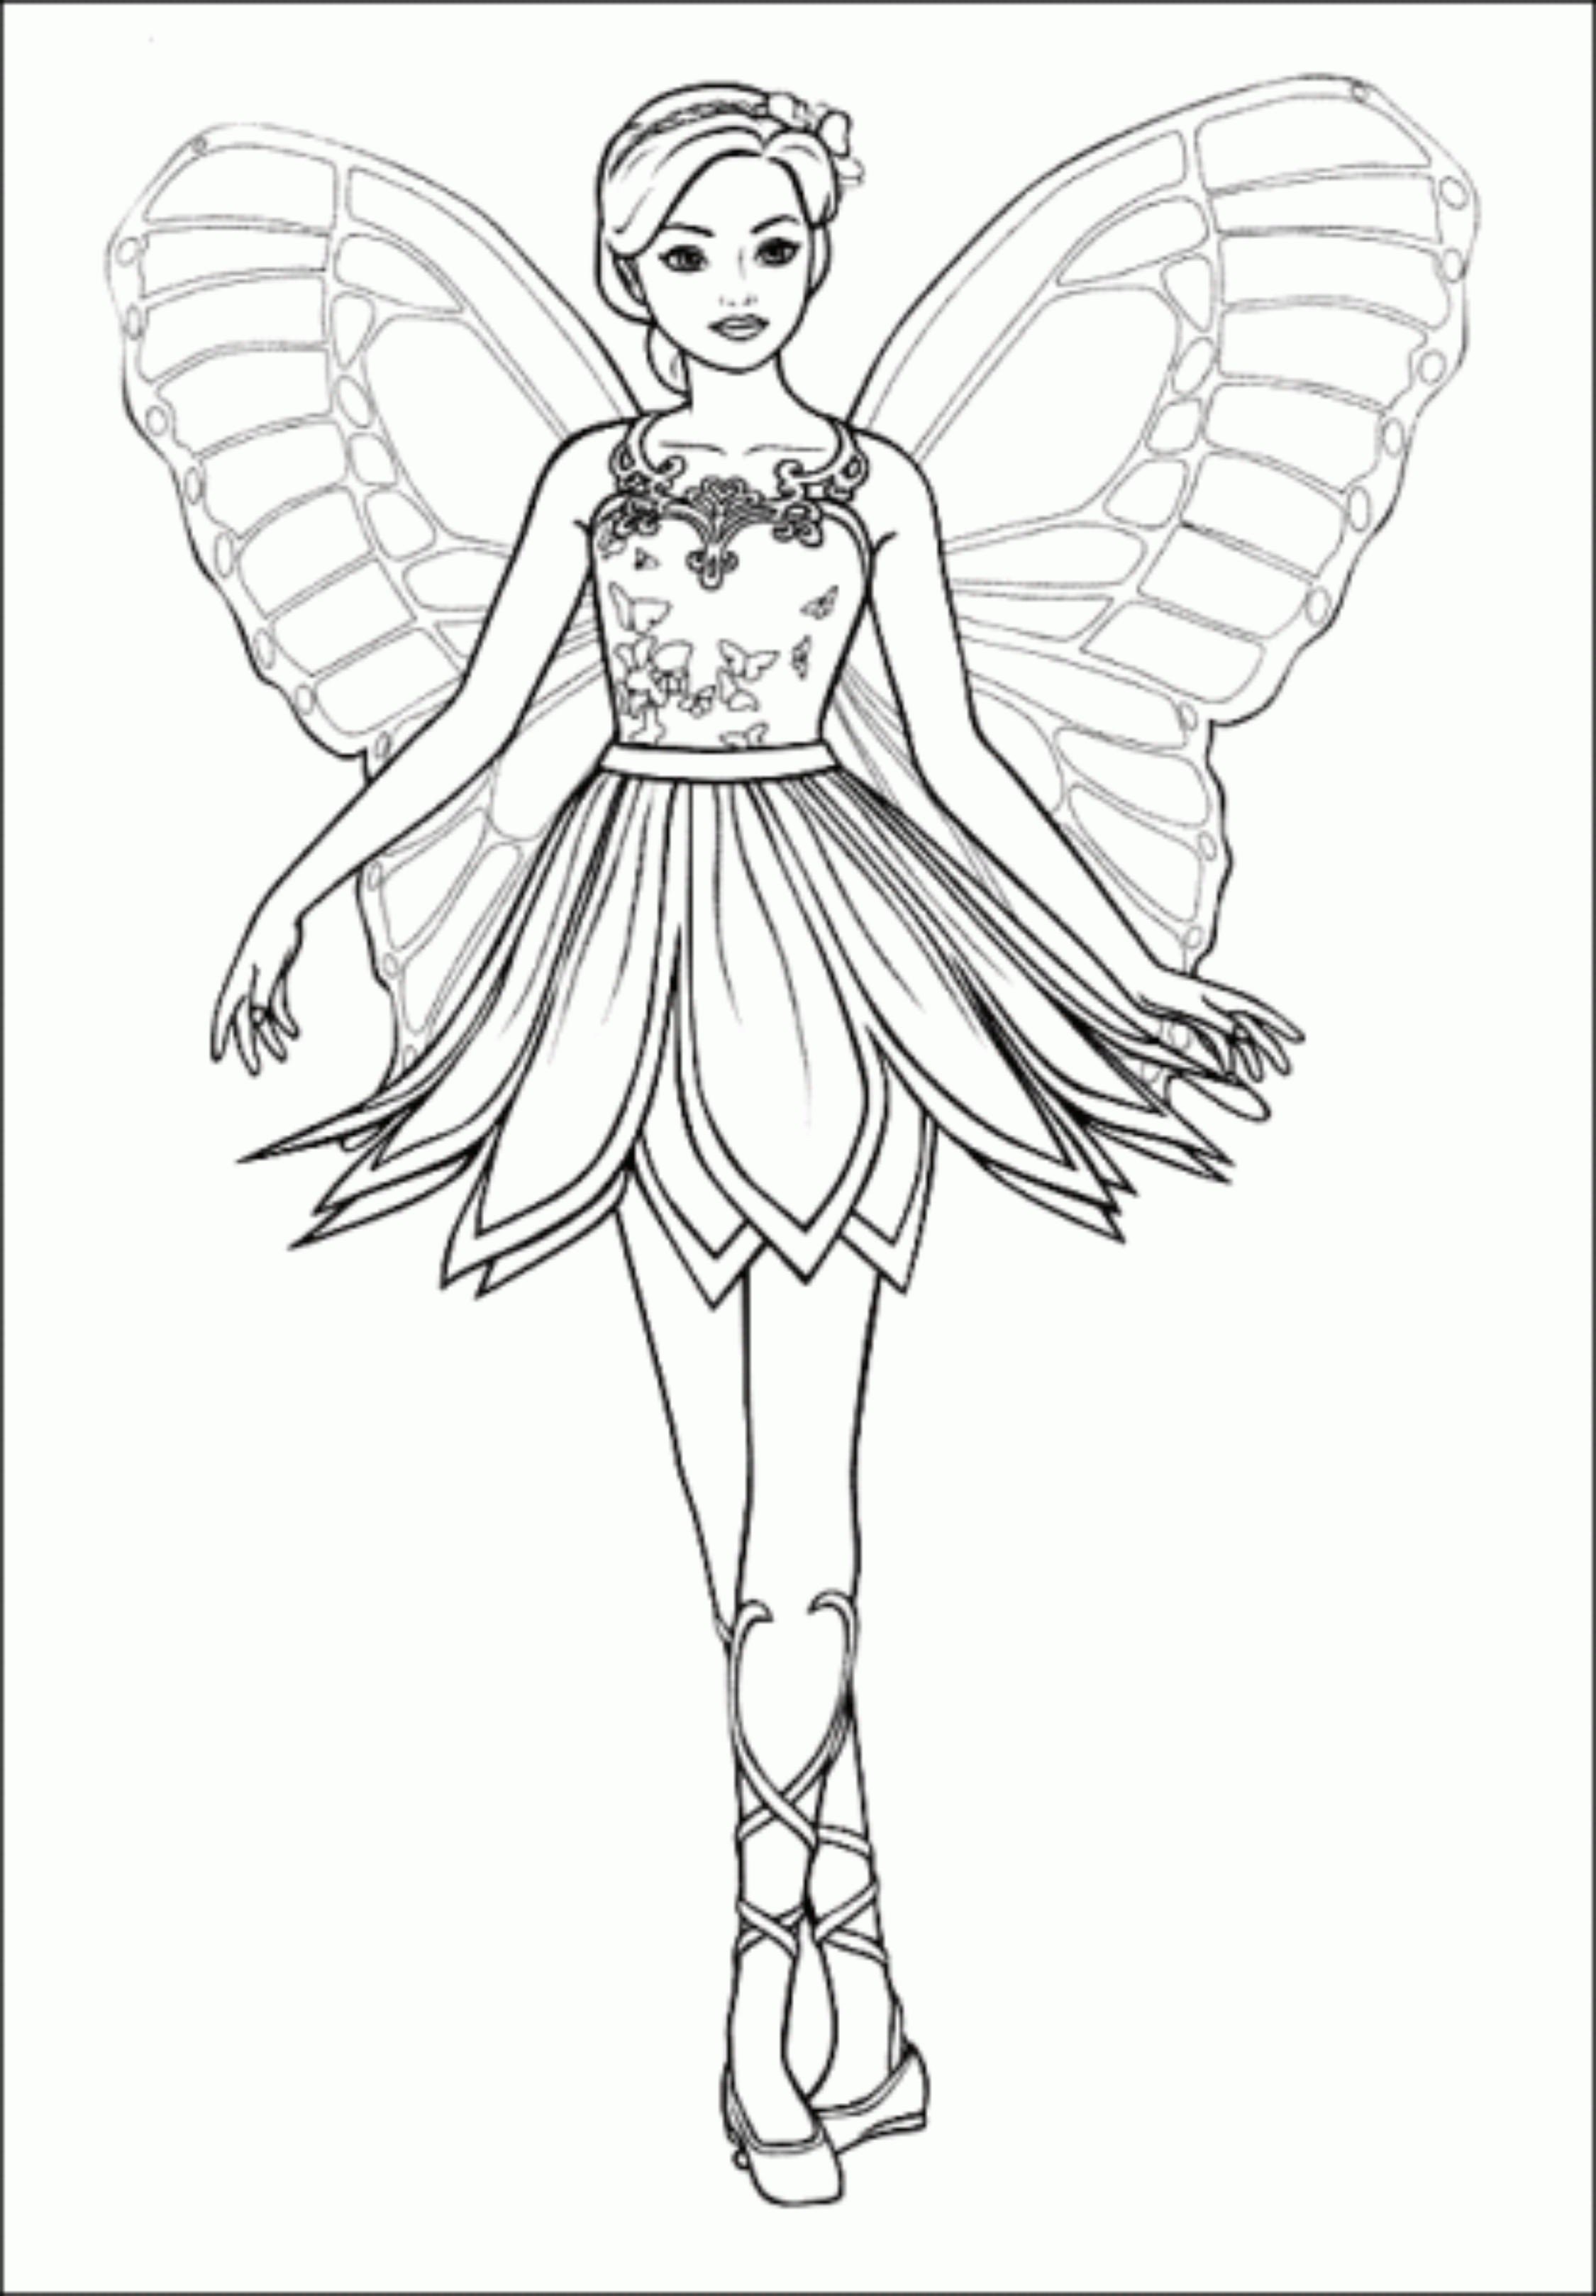 How To Draw Cute Girls Dolls Coloring Book:Amazon.com:Appstore for Android